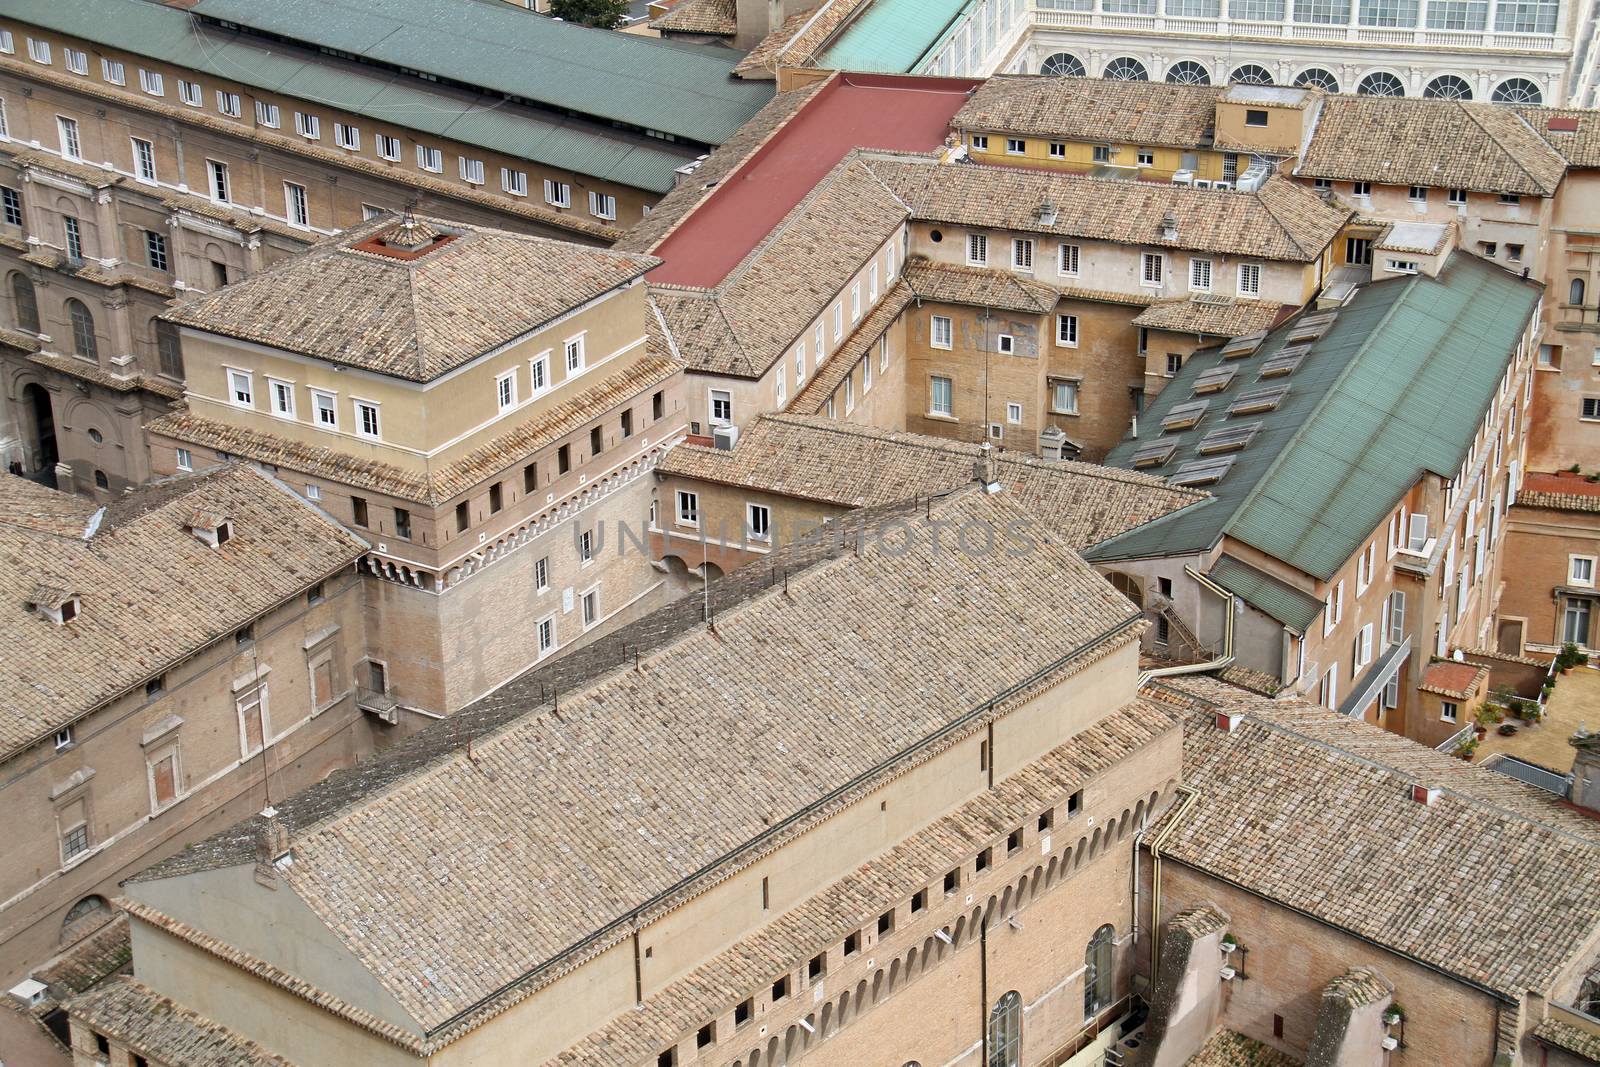 Administration buildings in the city of Vatican from the top of St. Peter Basilica in Rome, Italy